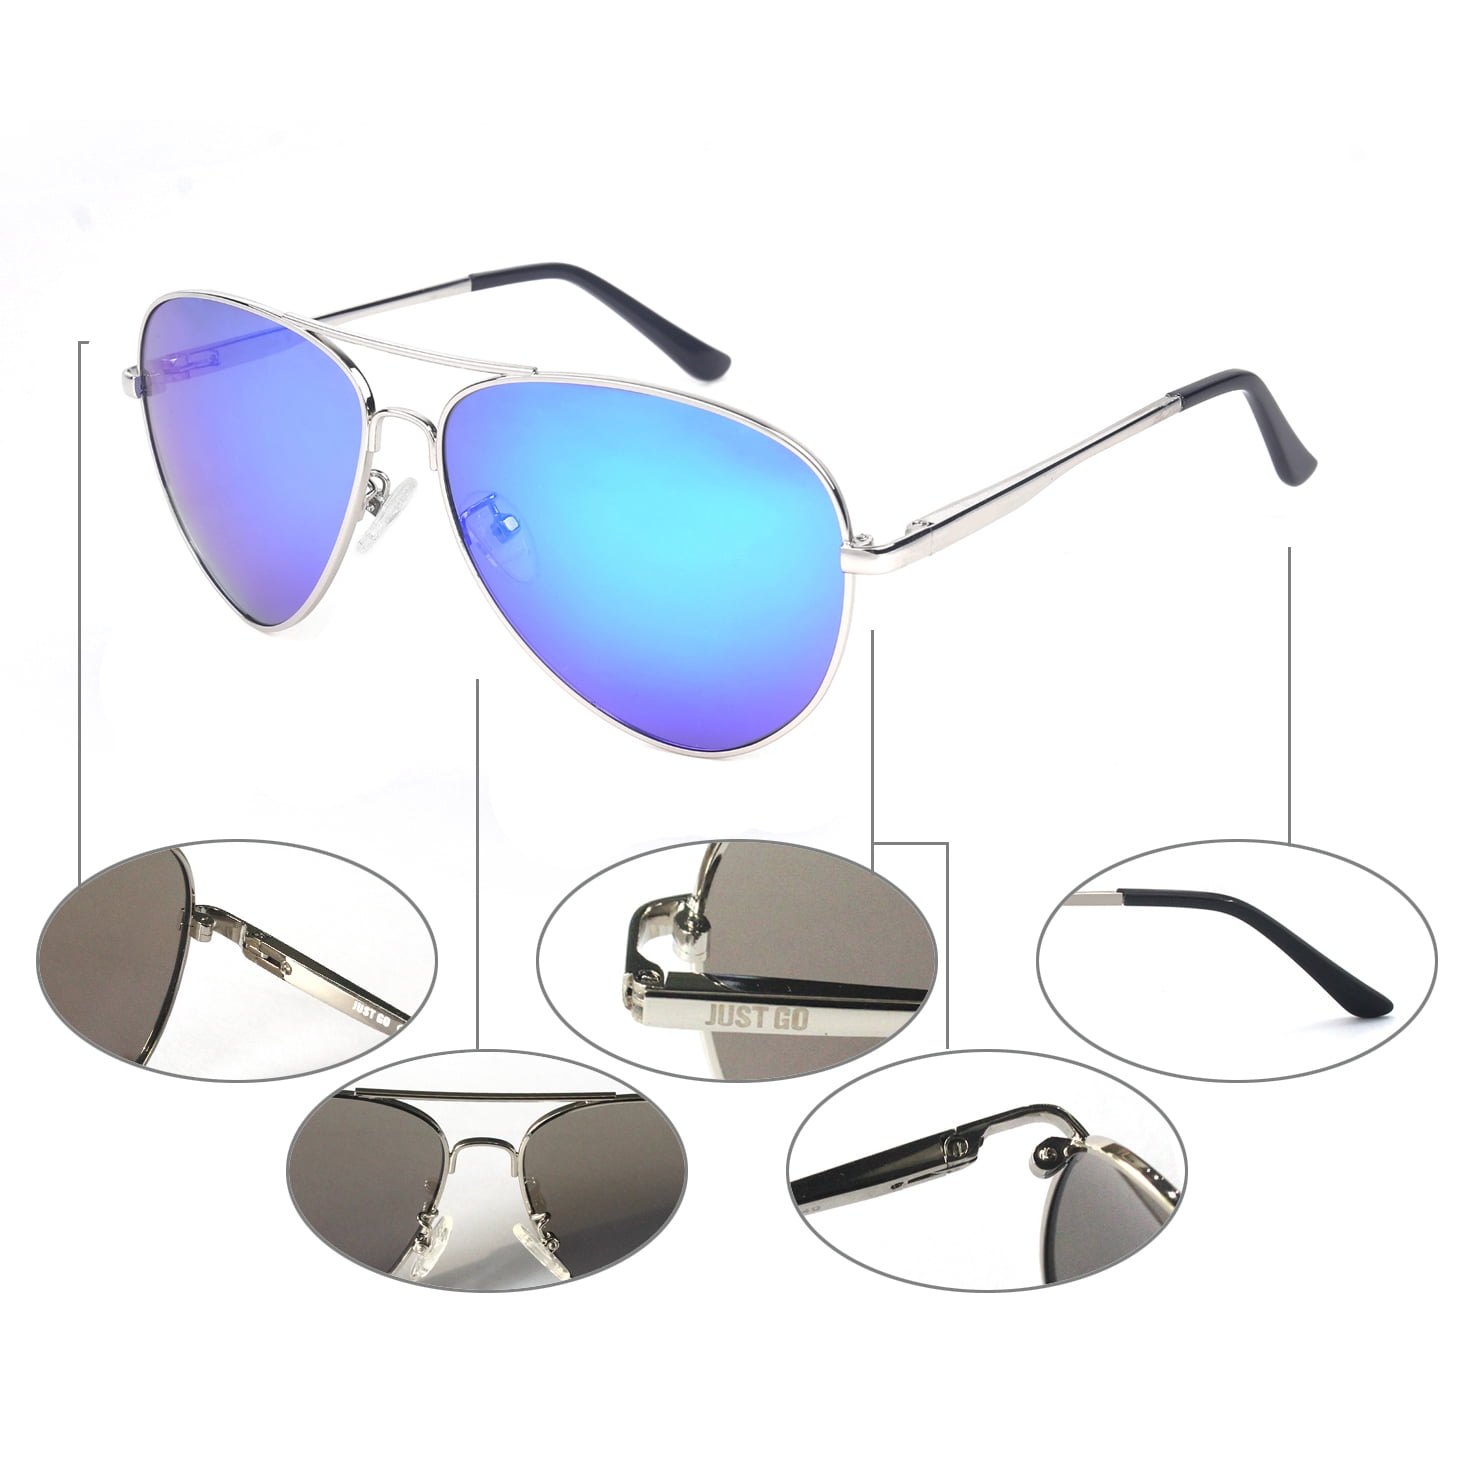 Polarized with Vintage Lenses, Sunglasses Metal Revo Matte Case, 100% JUST GO Frame UV Blue Aviator Style Gold, Protection,